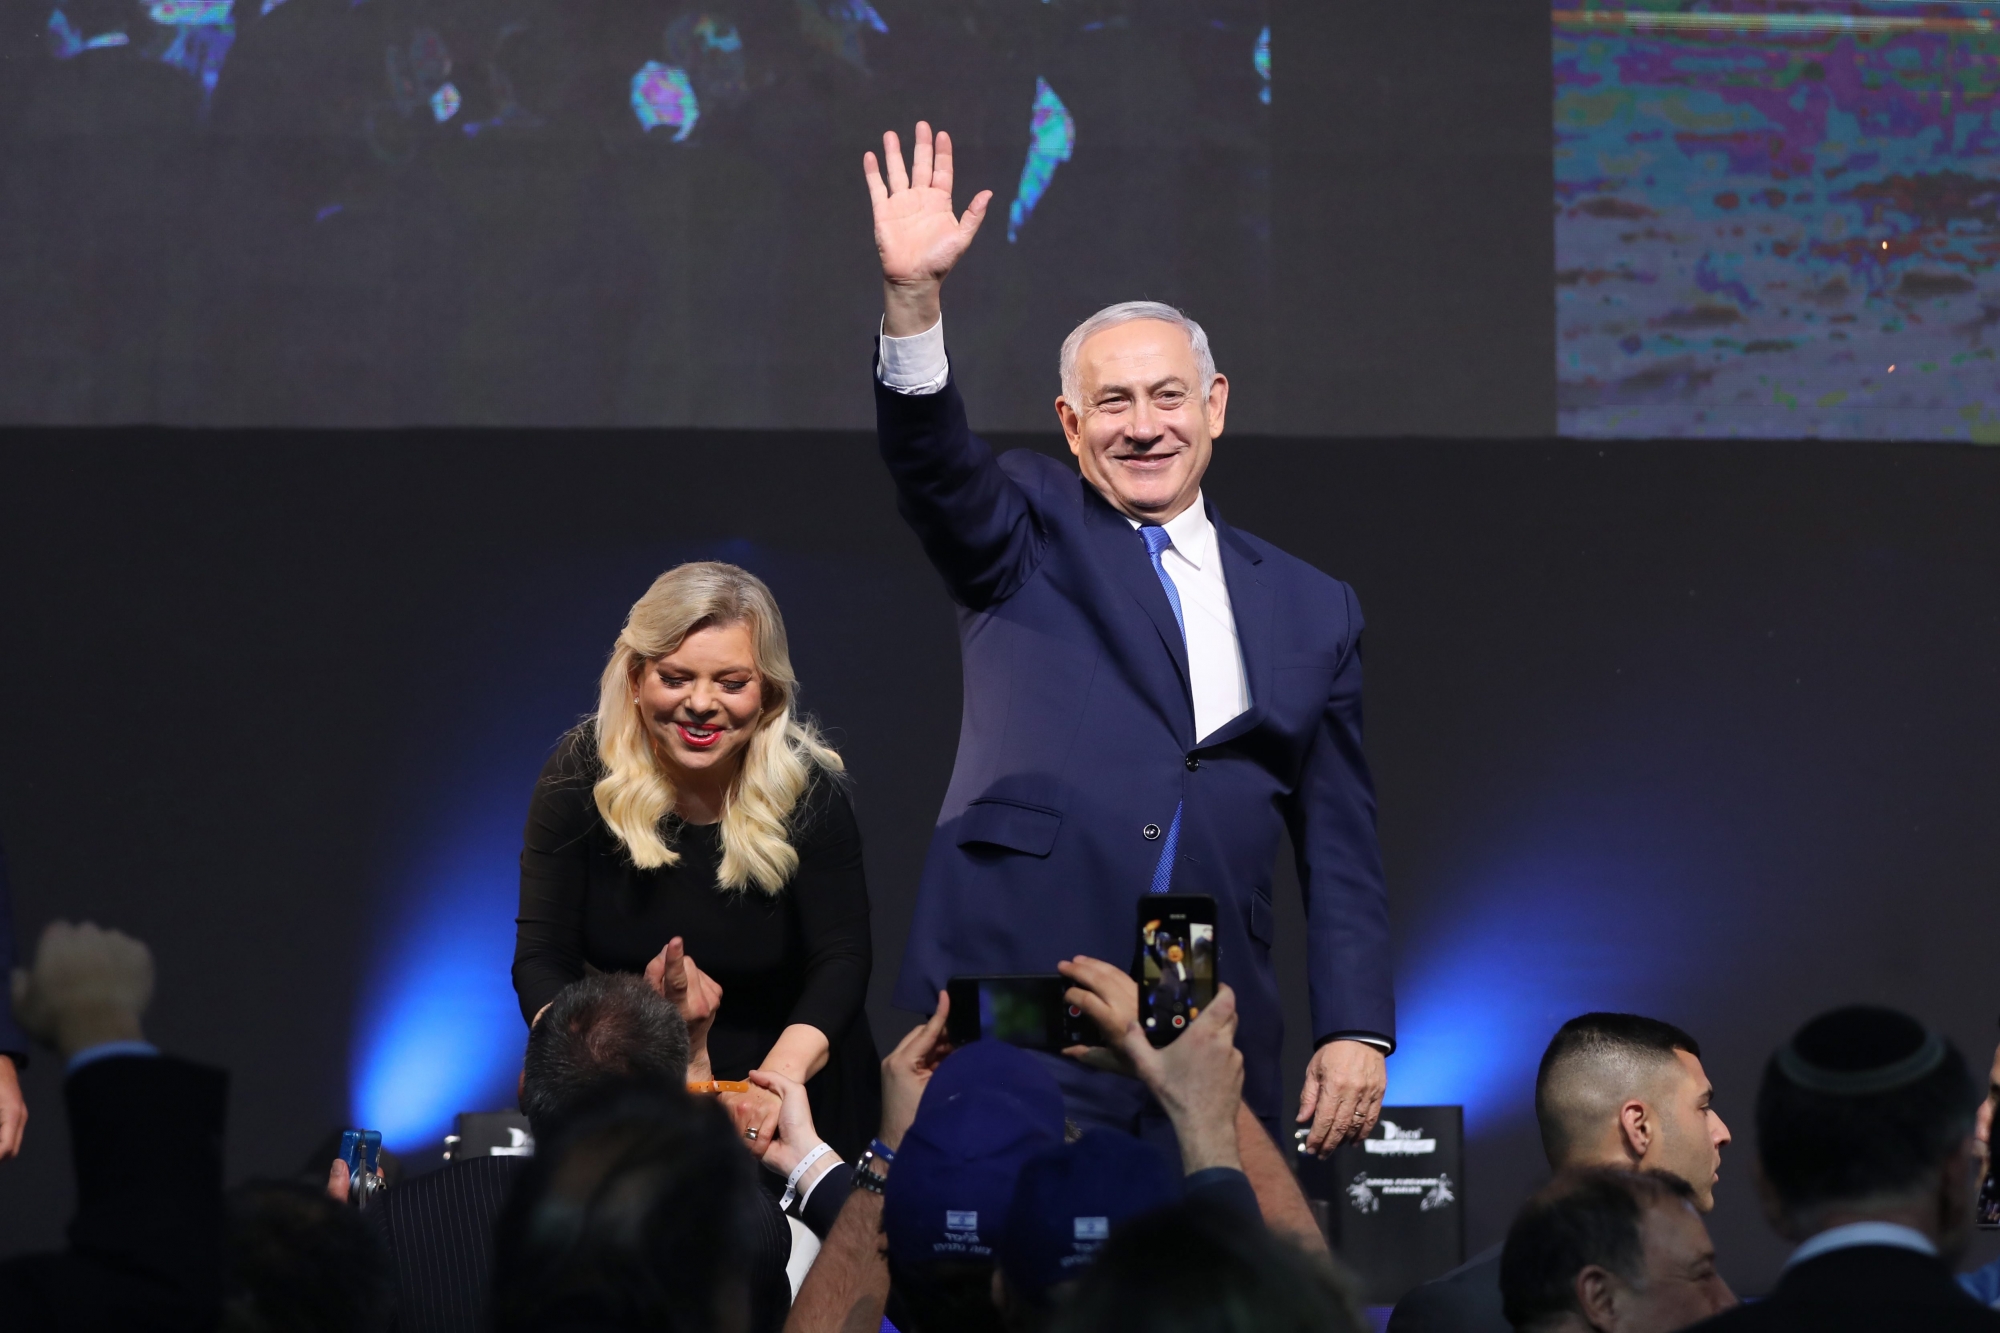 epa07495341 Israeli Prime Minister and Chairman of the Likud Party Benjamin Netanyahu (R) waves with his wife Sara after television predictions gave both Benjamin Netanyahu's Likud party and Benny Gantz's Blue and White party almost equal amount of Knesset seats in the Israeli general elections, in Tel Aviv, Israel, 09 April 2019.  EPA/ABIR SULTAN ISRAEL ELECTIONS